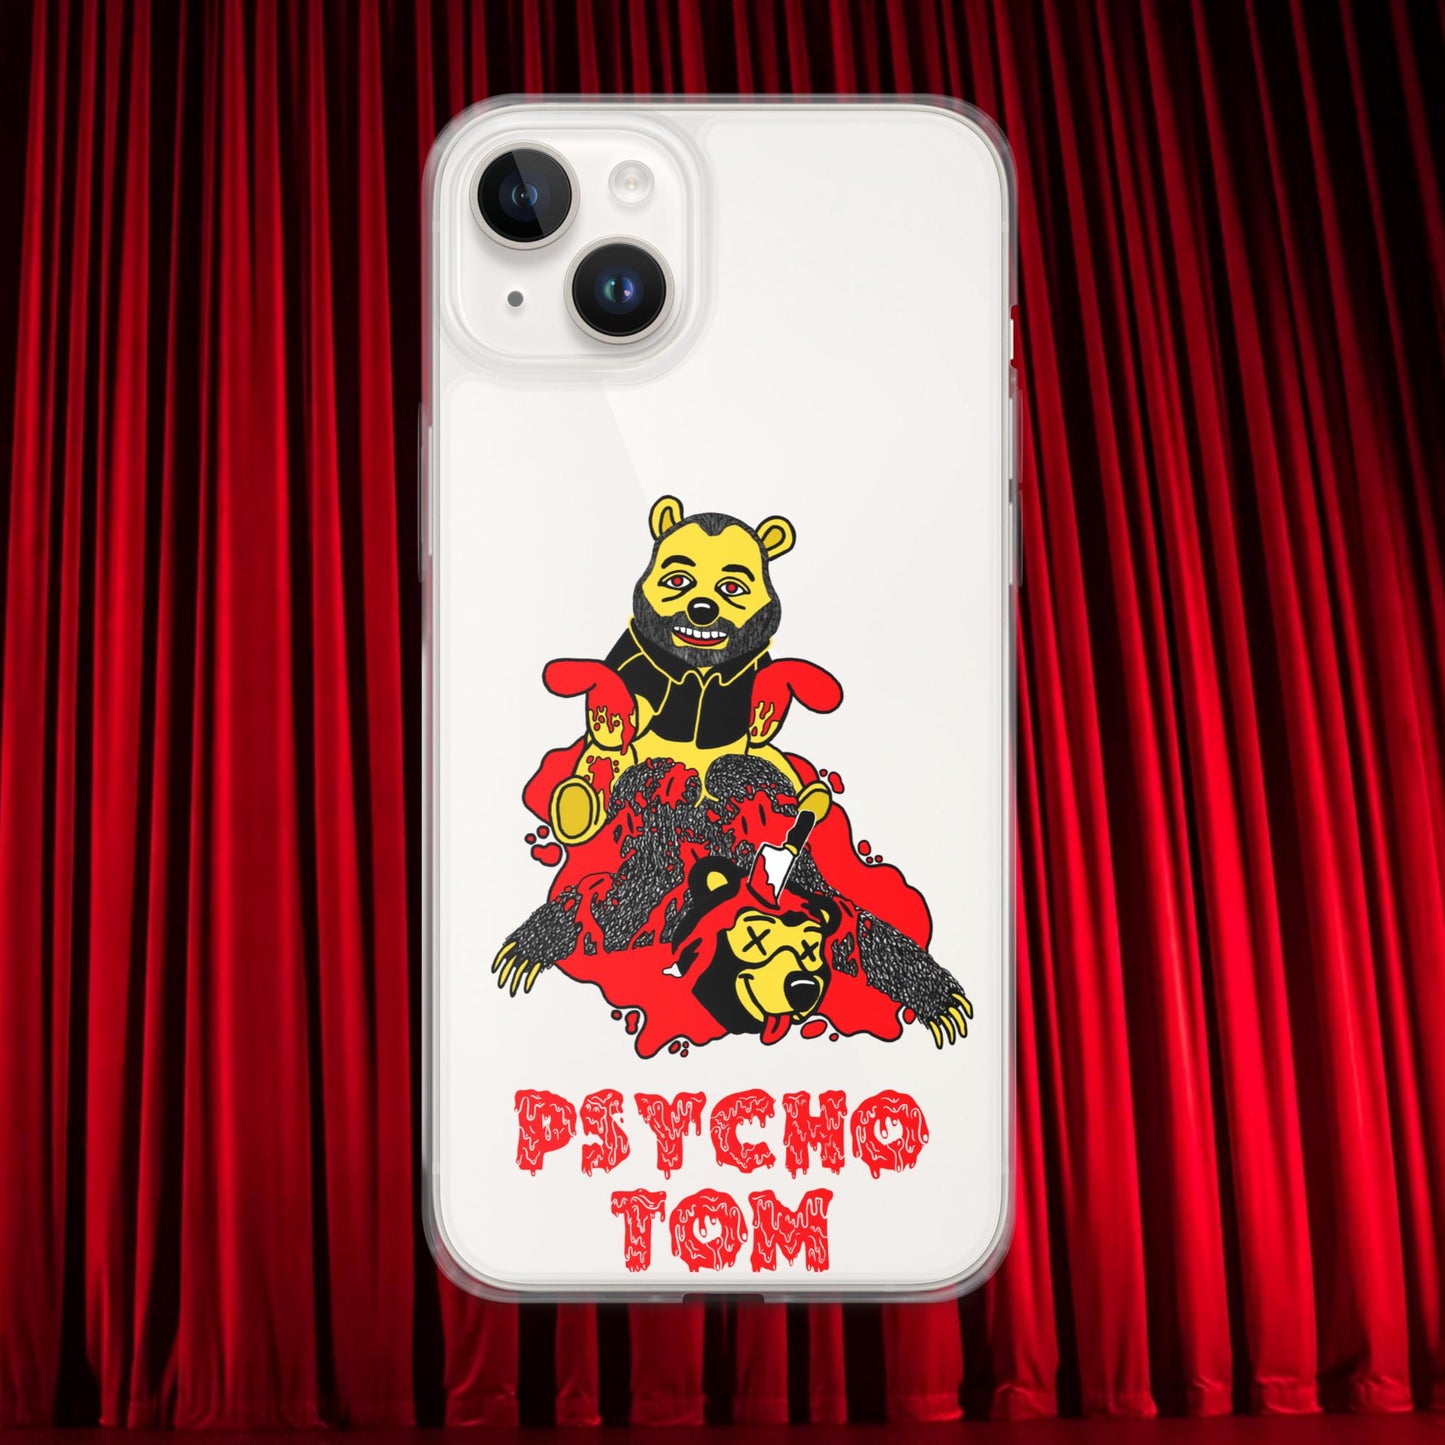 Psycho Tom Segura Clear Case for iPhone, Tom Segura Phone case, Tom Segura iPhone Case, 2b1c Clear Case for iPhone, 2 Bears 1 Cave merch, YMH merch Next Cult Brand 2 Bears 1 Cave, Podcasts, Stand-up Comedy, Tom Segura, YMH